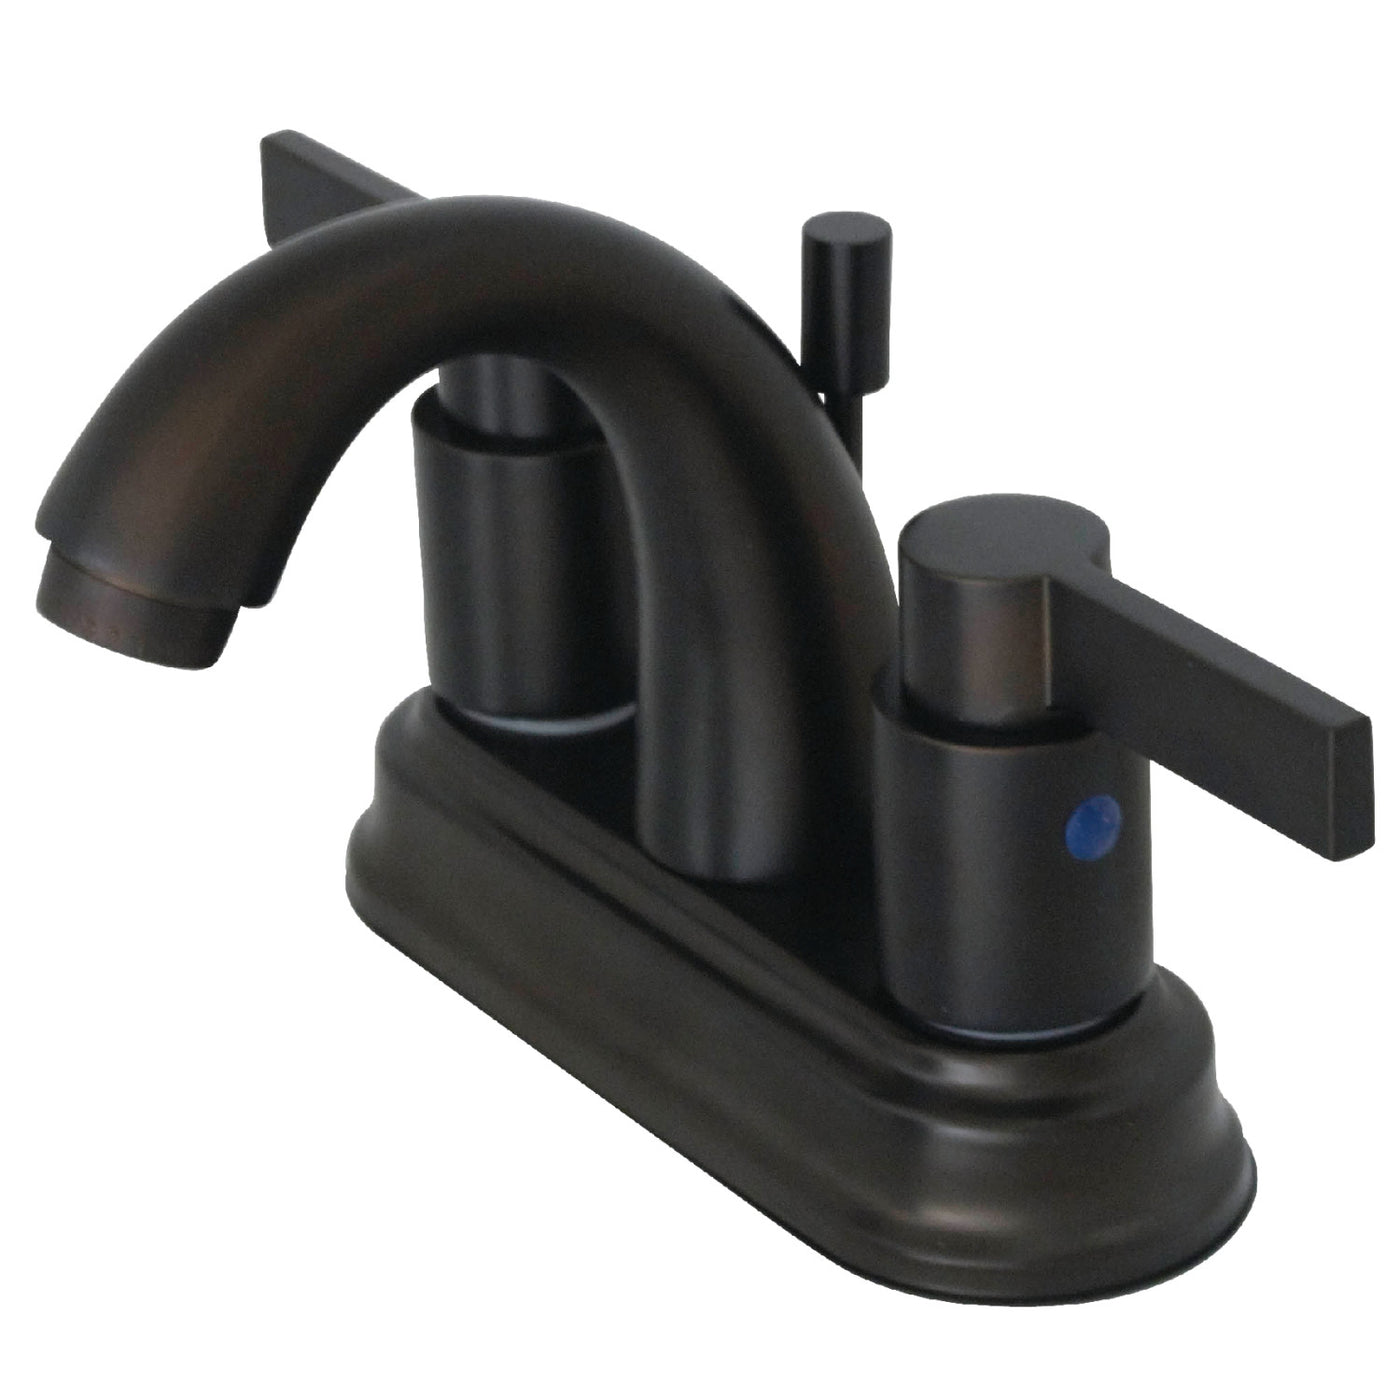 Elements of Design EB8615NDL 4-Inch Centerset Bathroom Faucet with Retail Pop-Up, Oil Rubbed Bronze